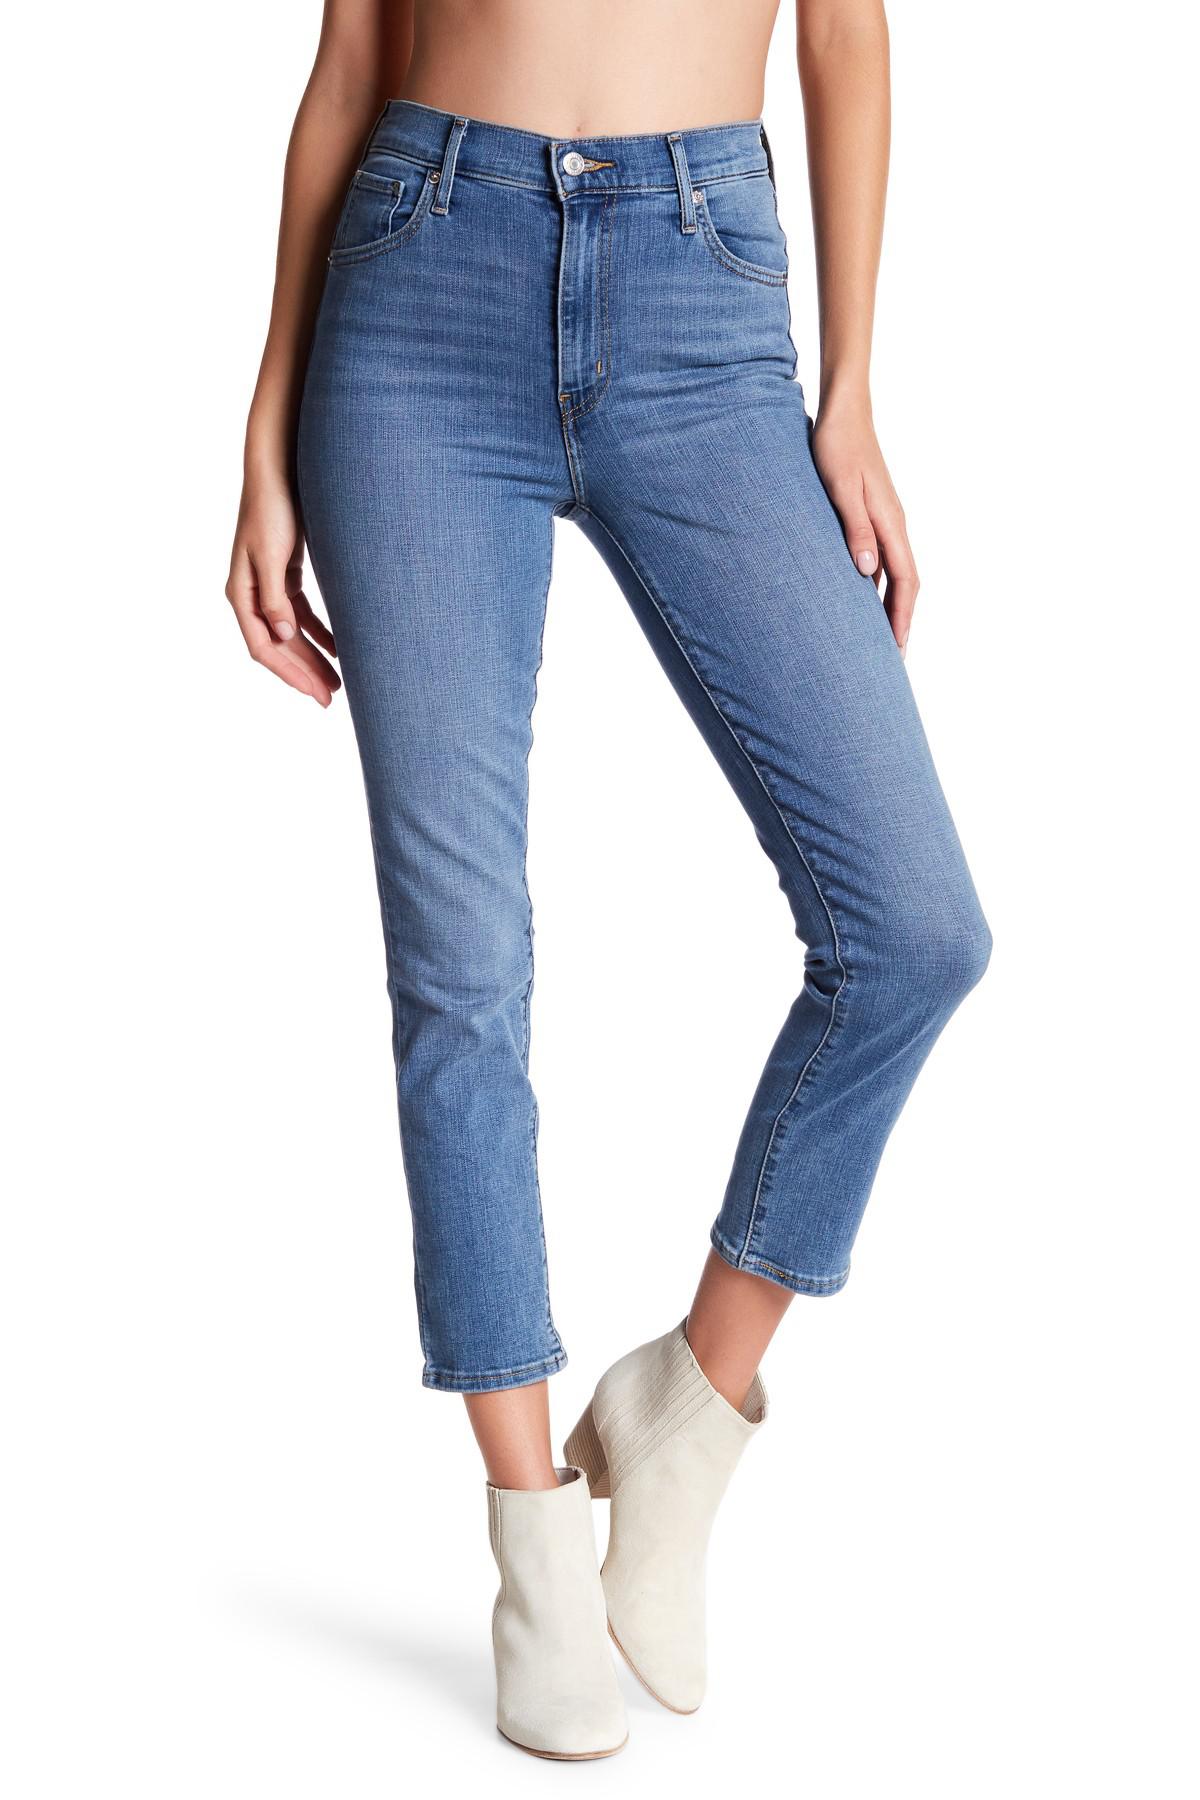 levi's mile high slim cropped jeans